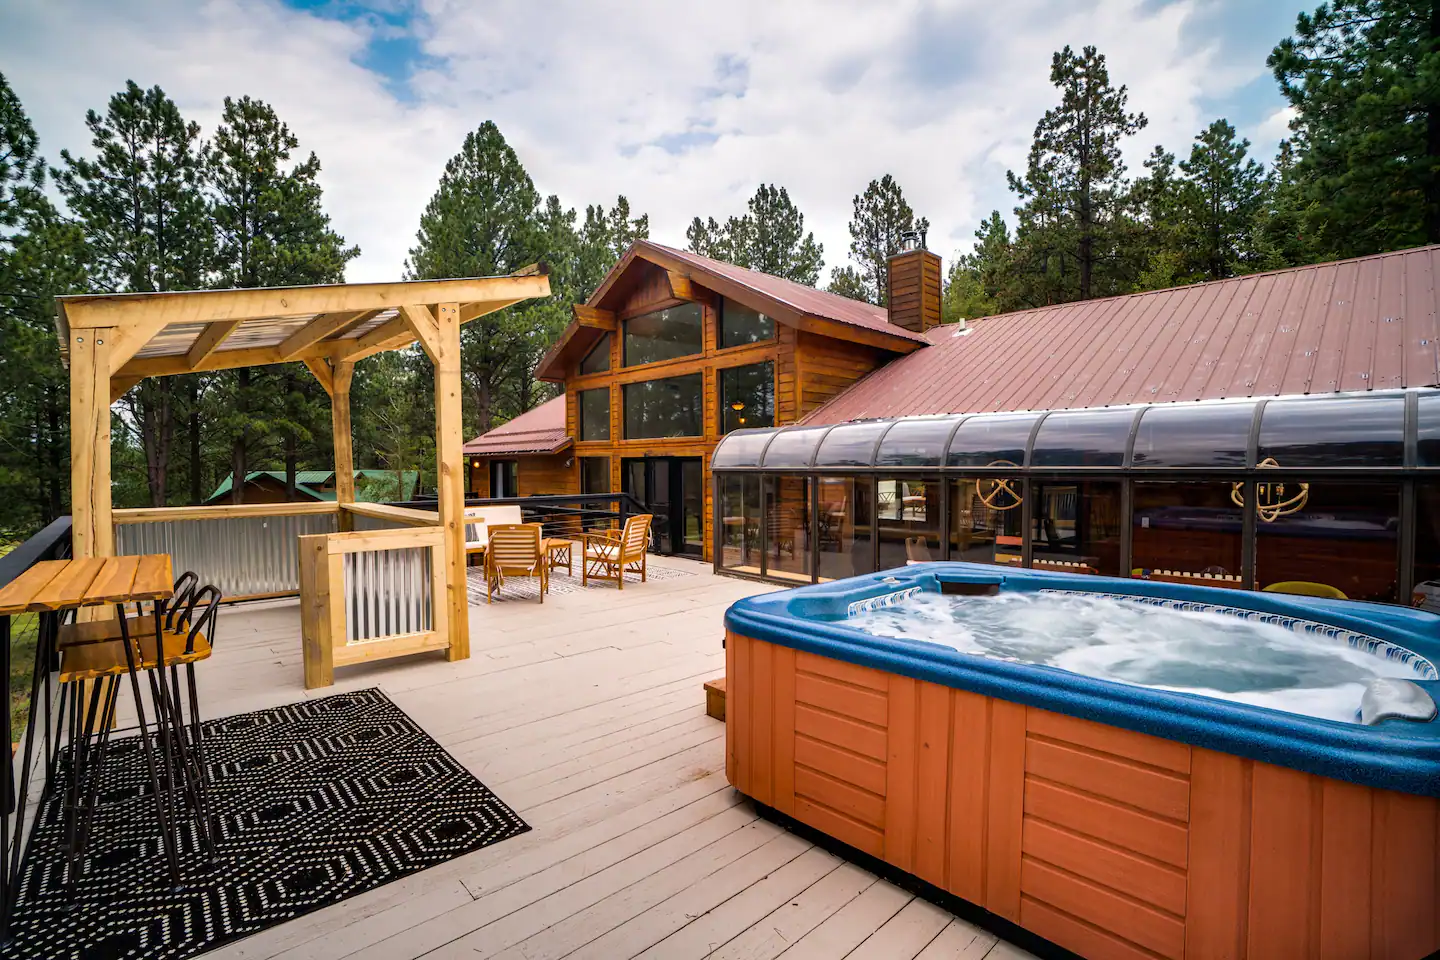 Private deck featuring a hot tub and bar.
